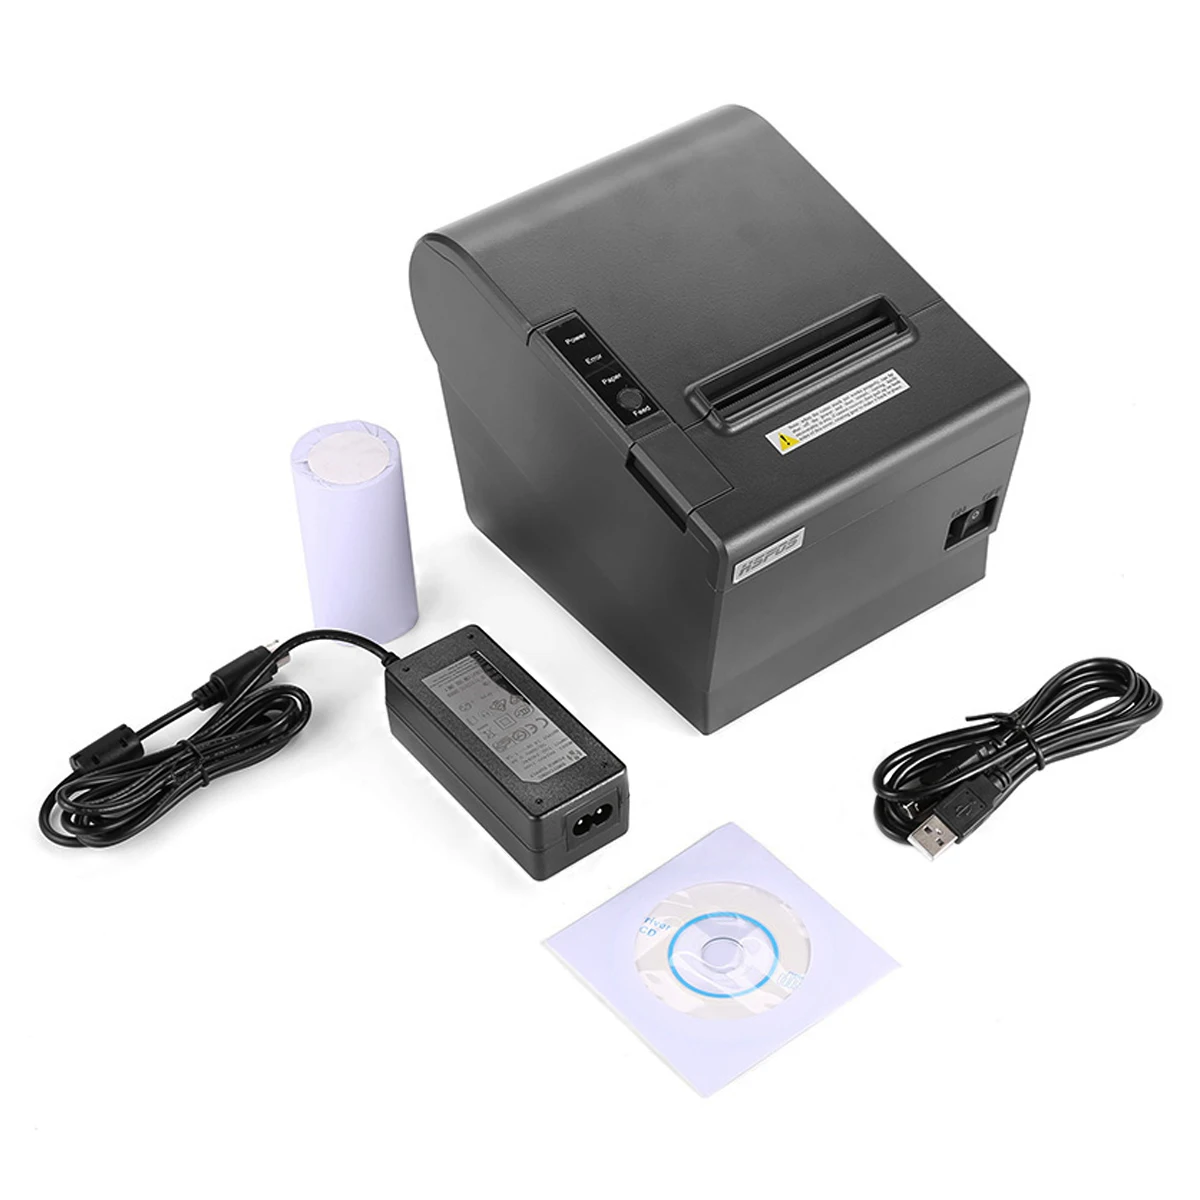 

HSPOS Hot Sale Cheap Receipt 80mm POS Thermal Printer With Auto Cutter 802U